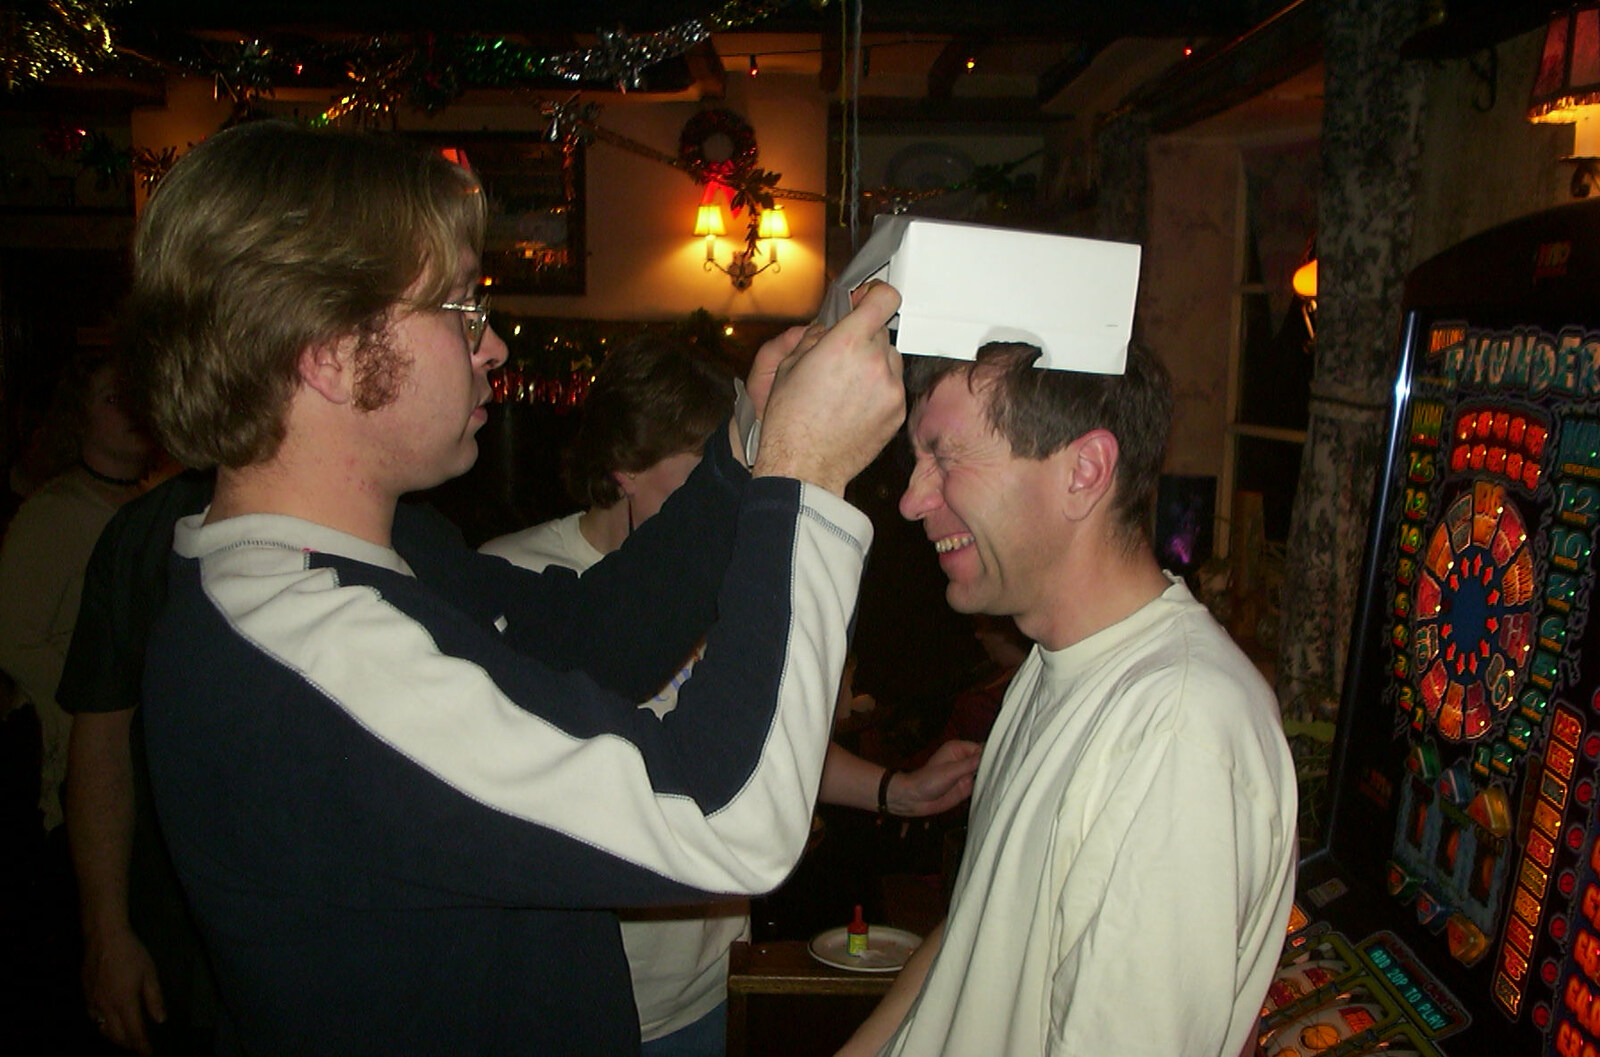 New Year's Eve at the Swan Inn, Brome, Suffolk - 31st December 2002: Marc pokes at Apple's box hat